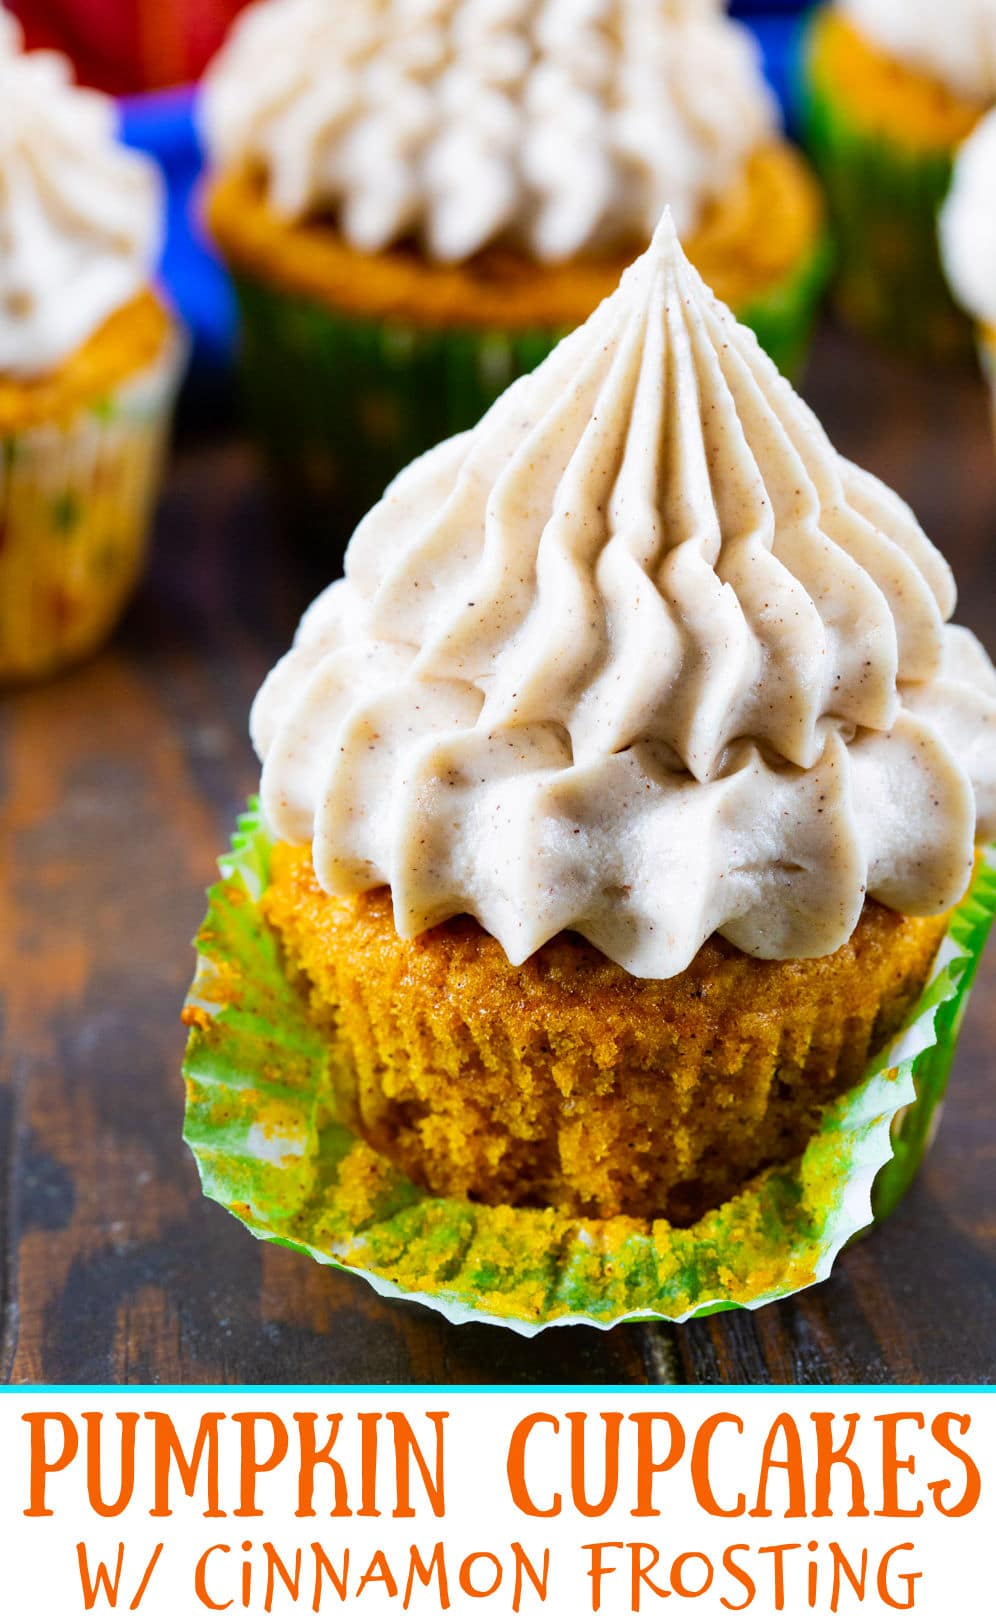 Pumpkin Cupcake with cupcake liner pulled down.